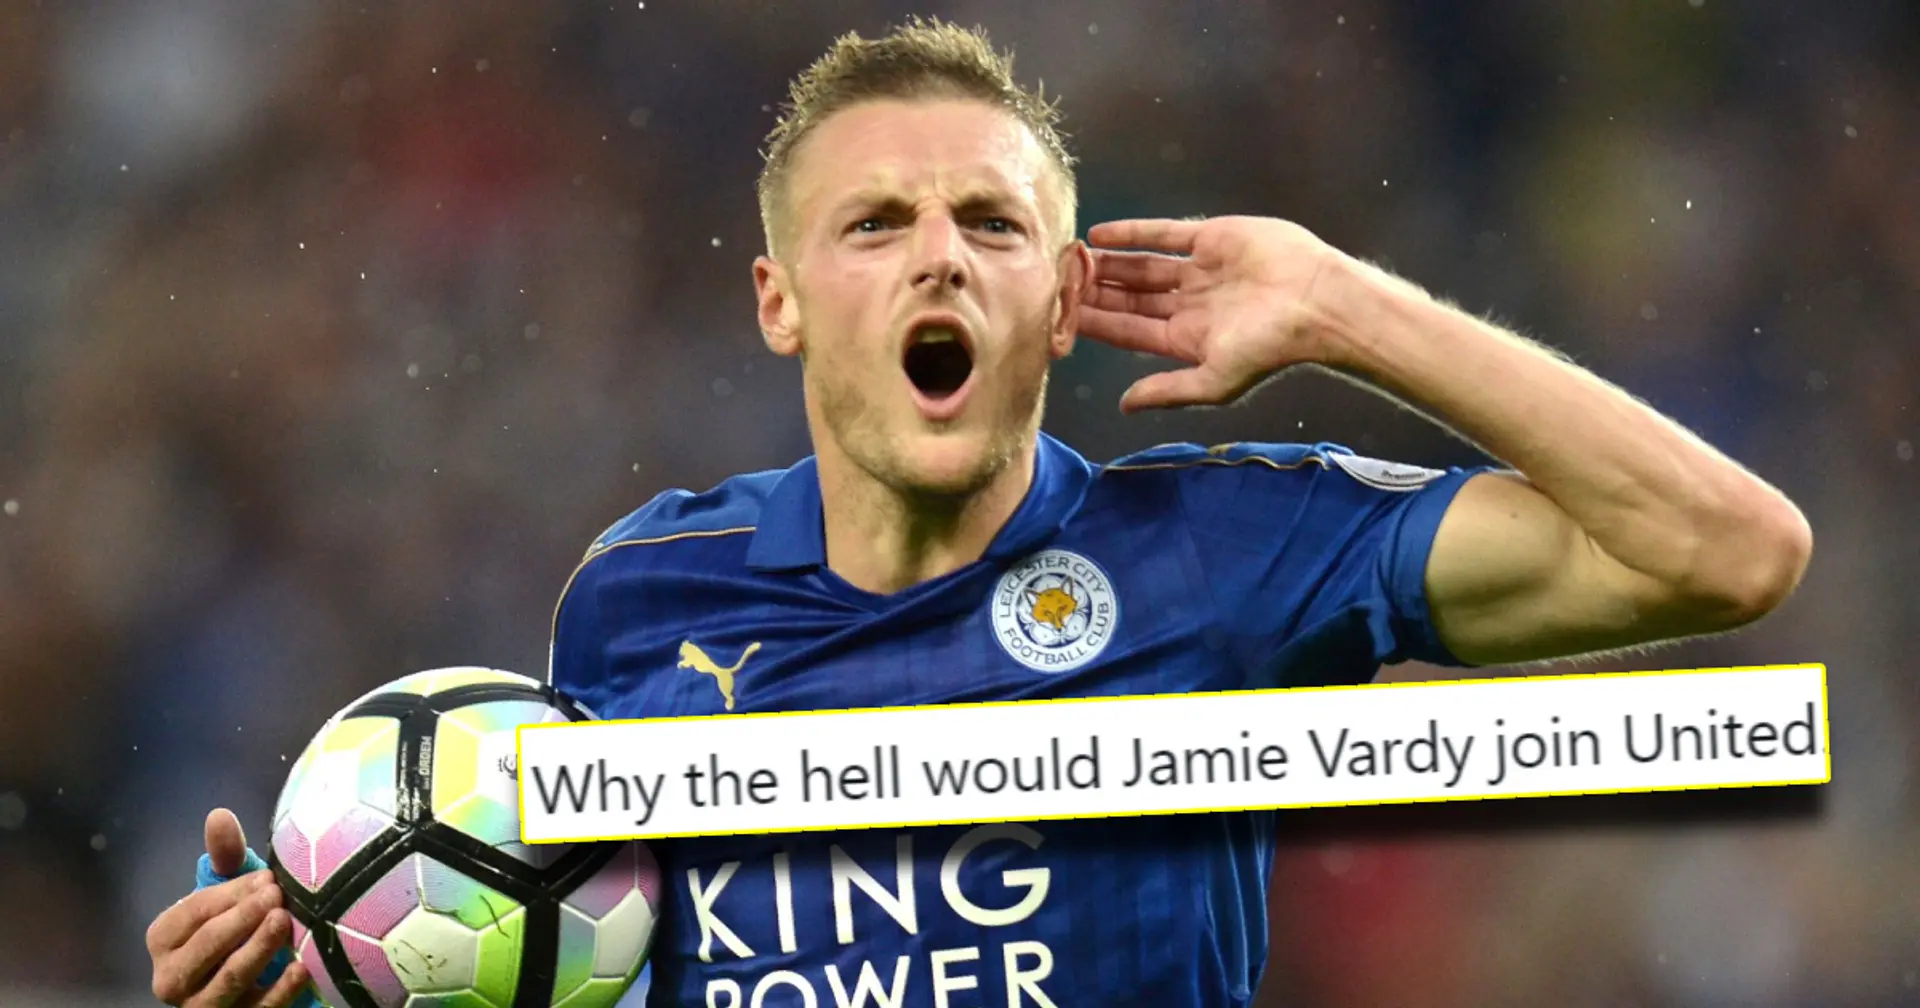 'We've given up on football': Fans in disbelief as Man United linked with shock Jamie Vardy move